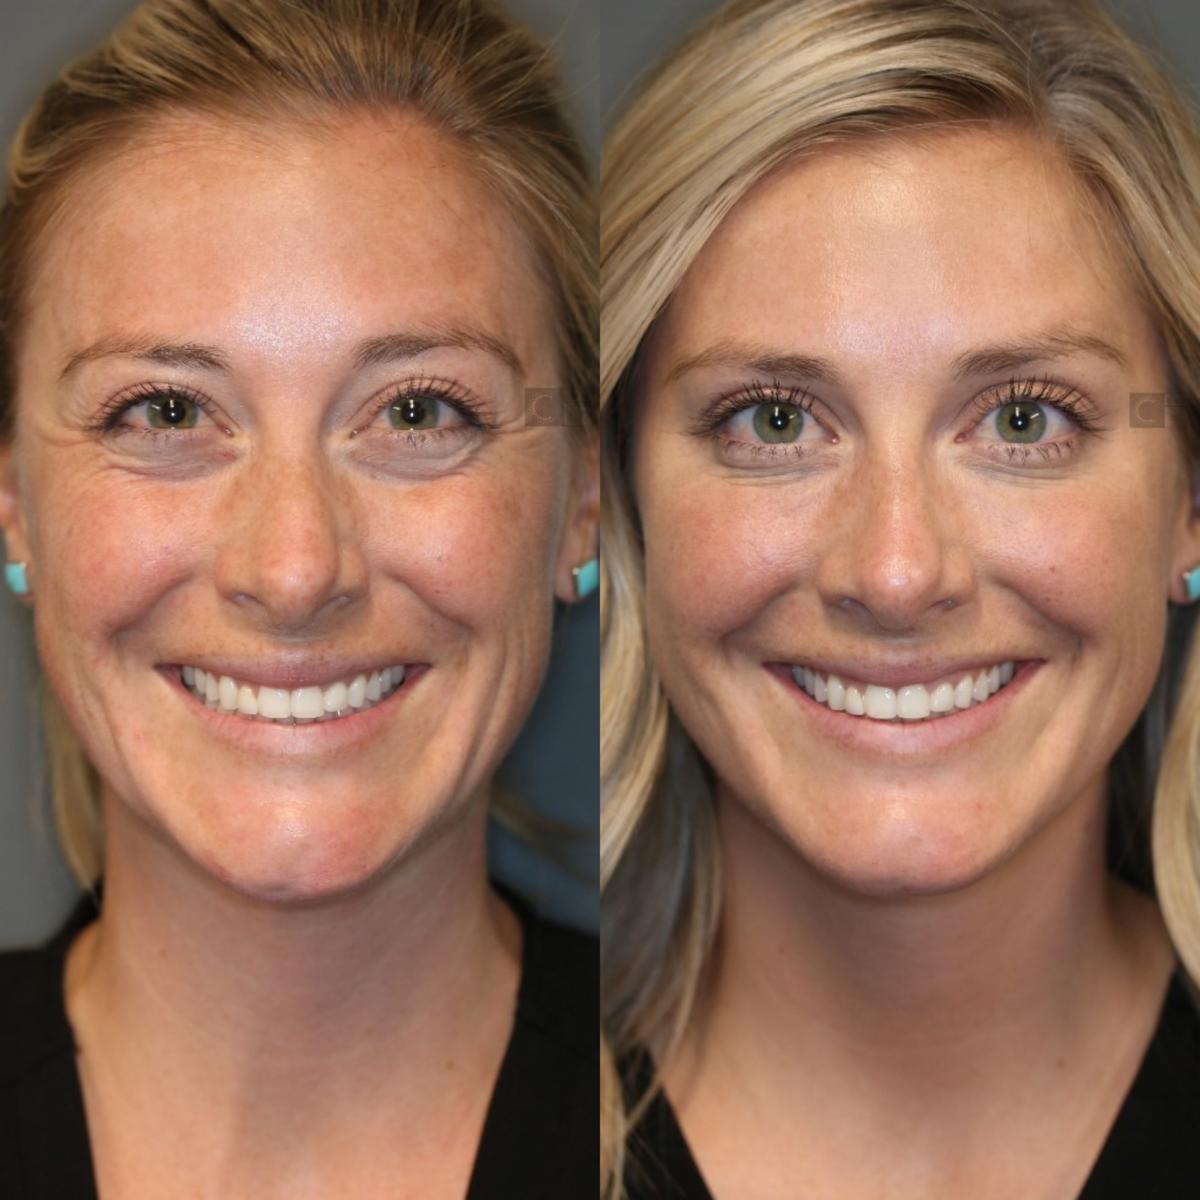 Before and after wrinkle treatment